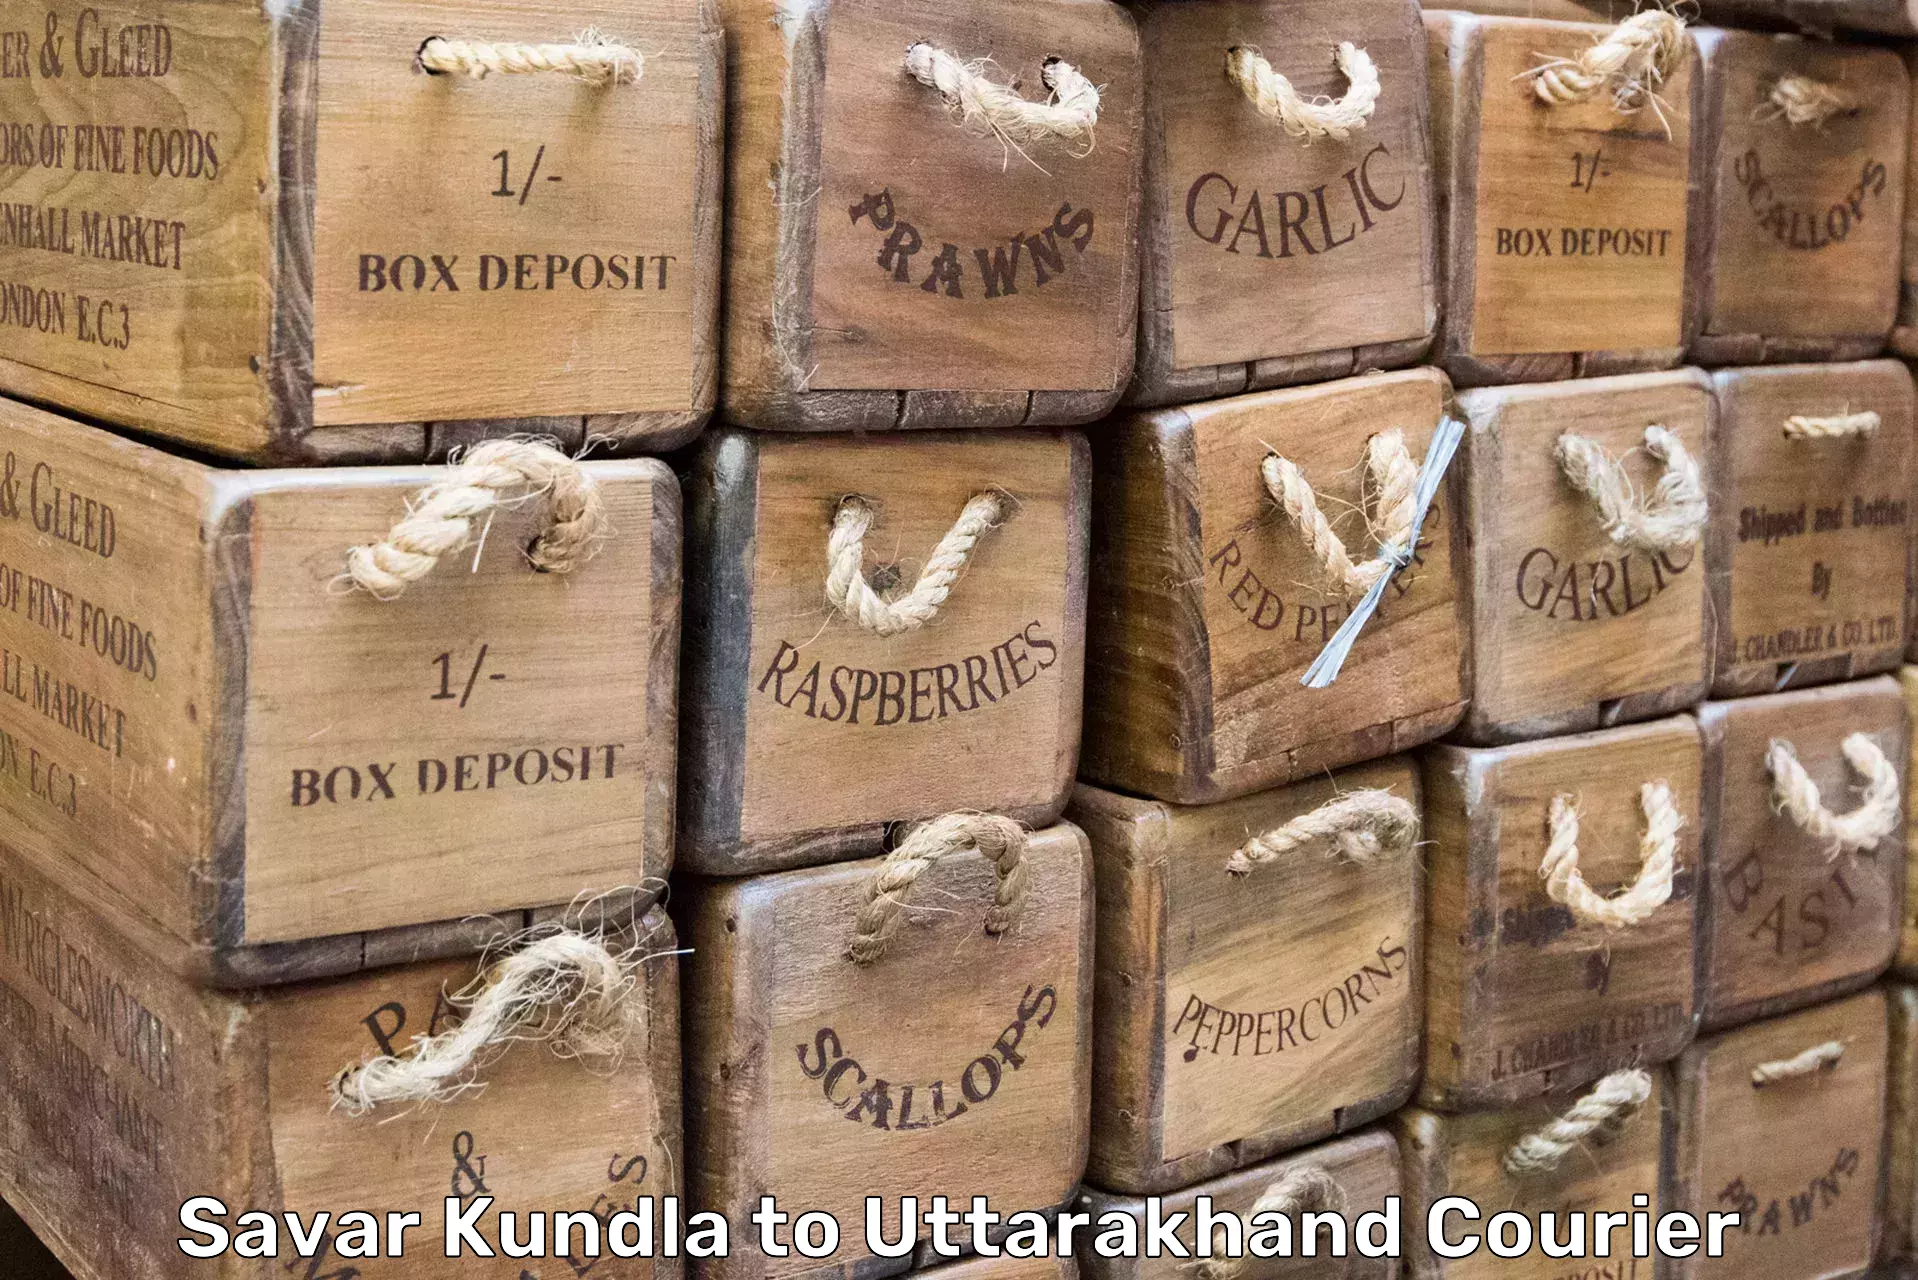 Moving and storage services Savar Kundla to IIT Roorkee